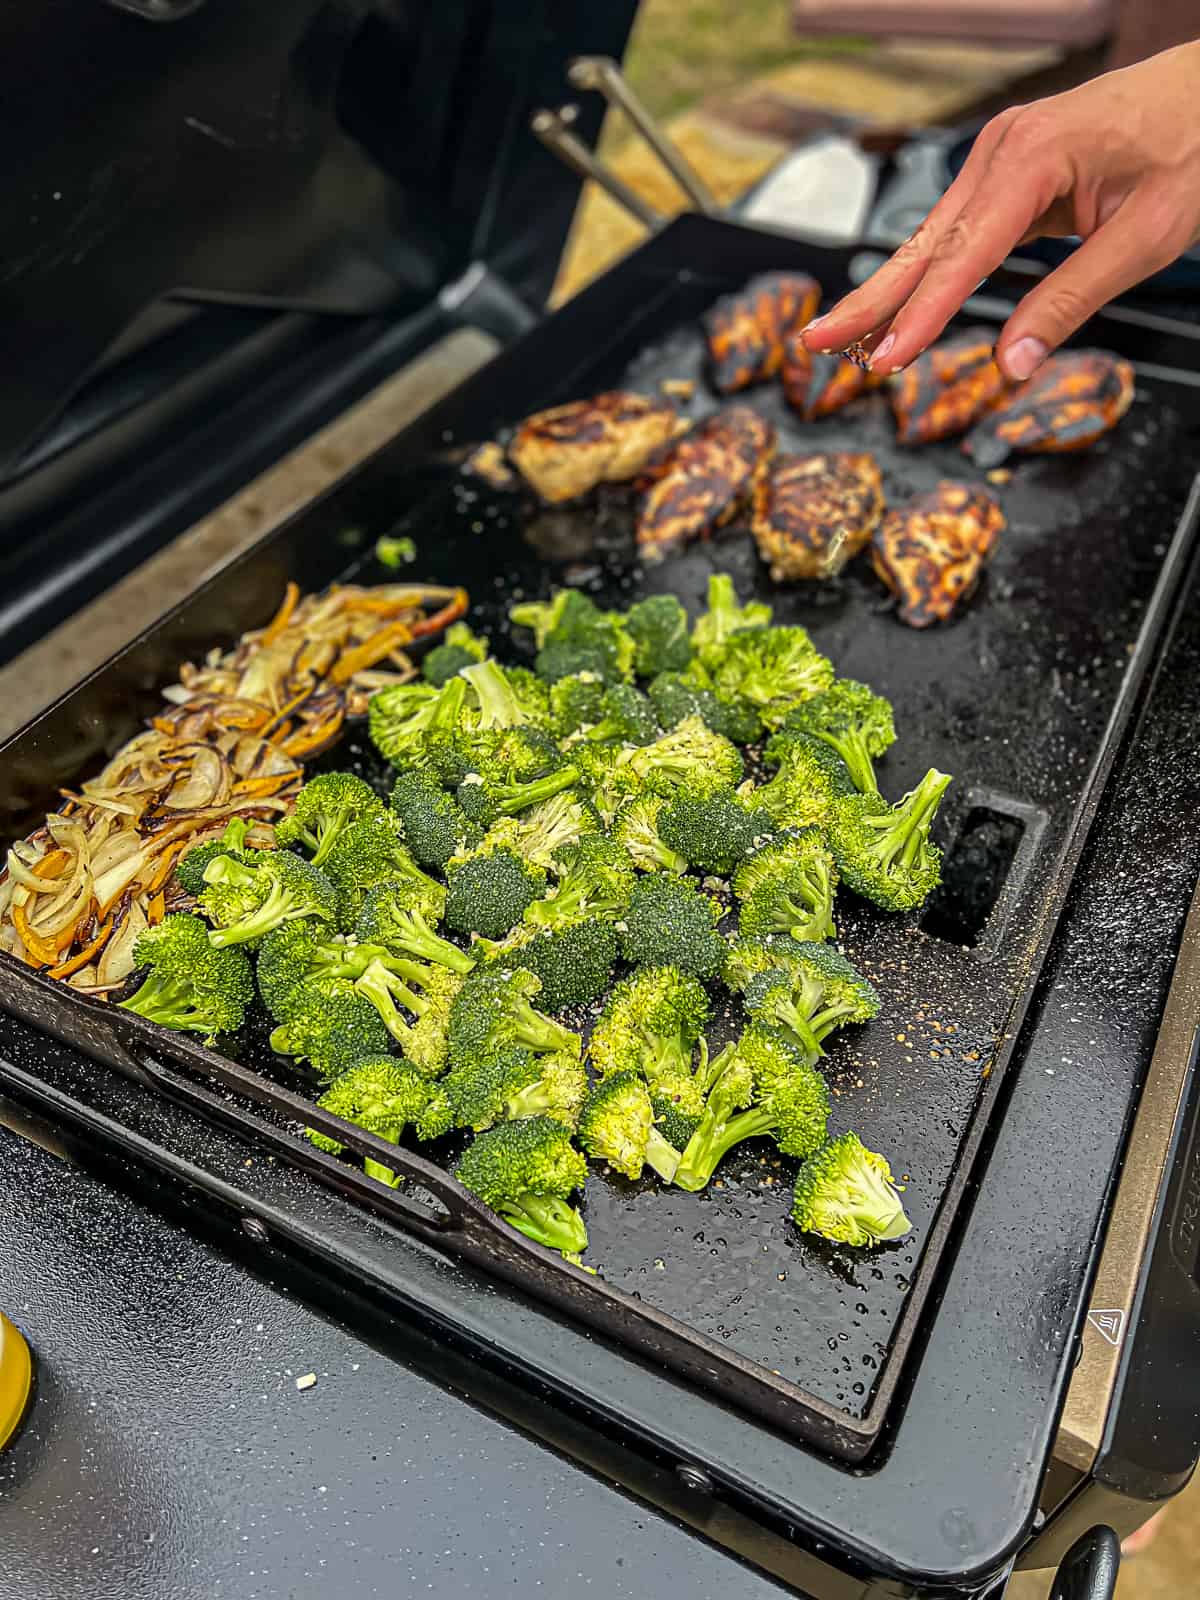 Griddle cooking chicken breast with broccoli and onions on the Flatrock Traeger Griddle